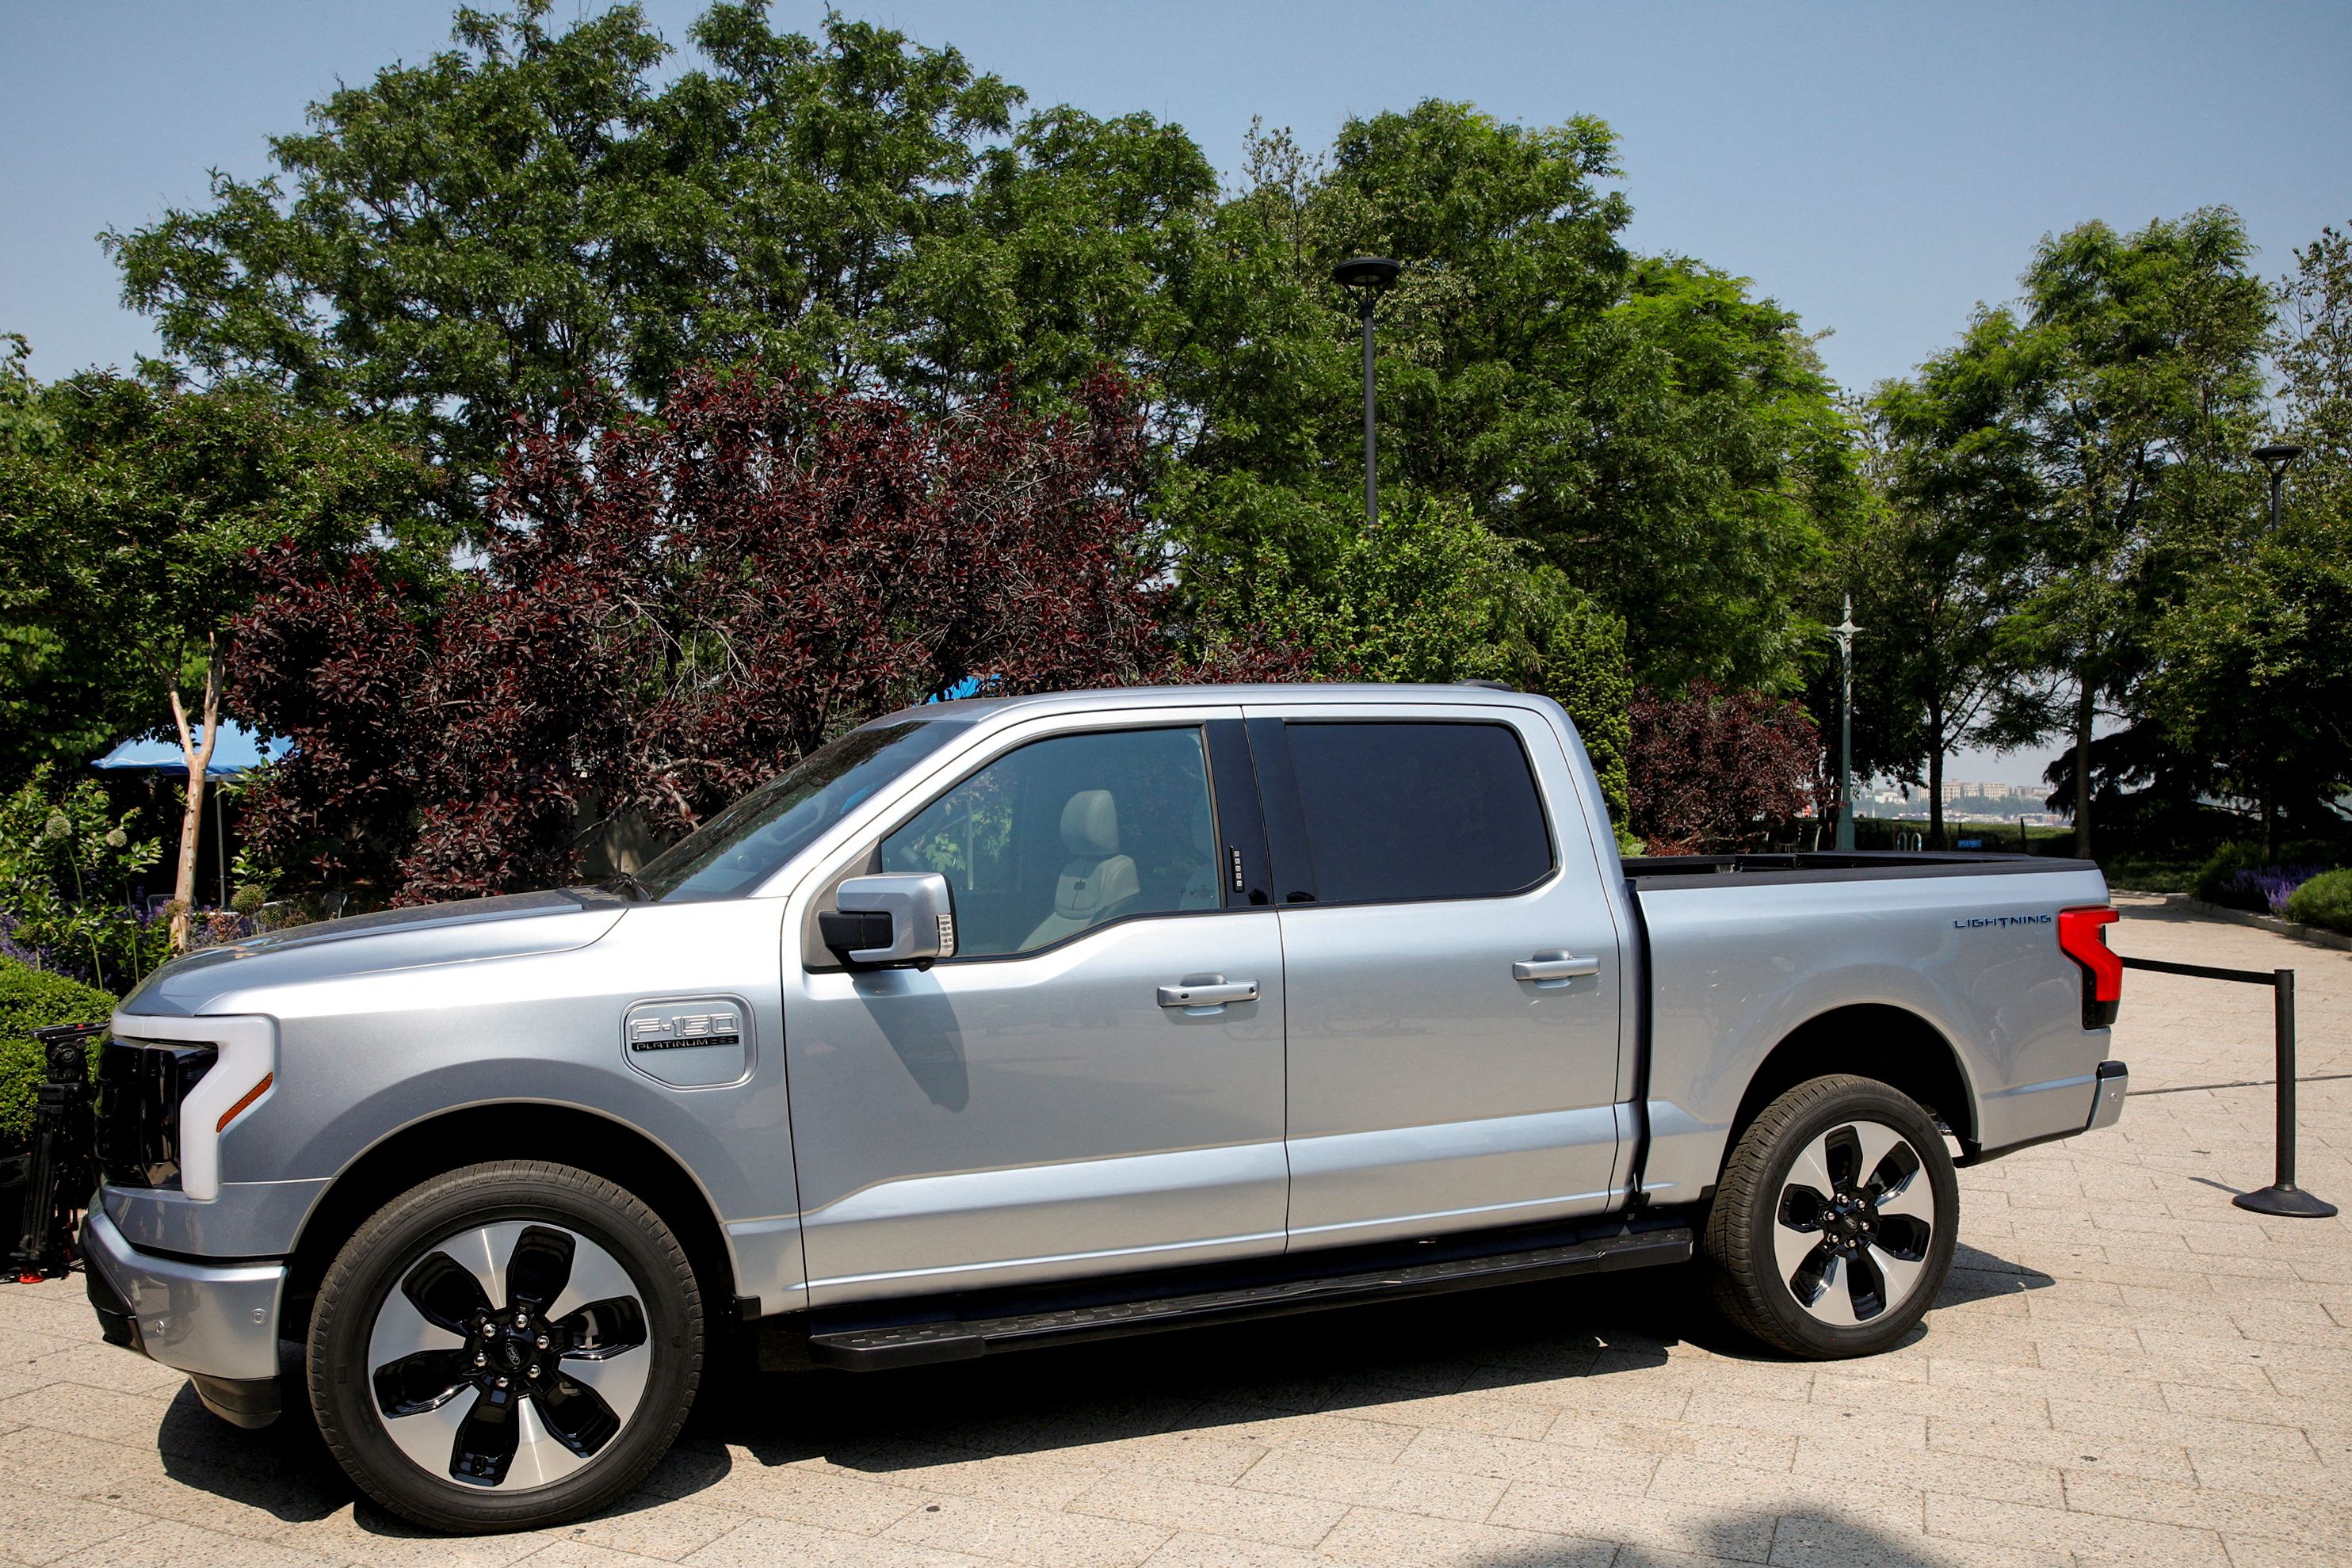 The Ford F-150 Lightning pickup truck is seen during a press event in New York